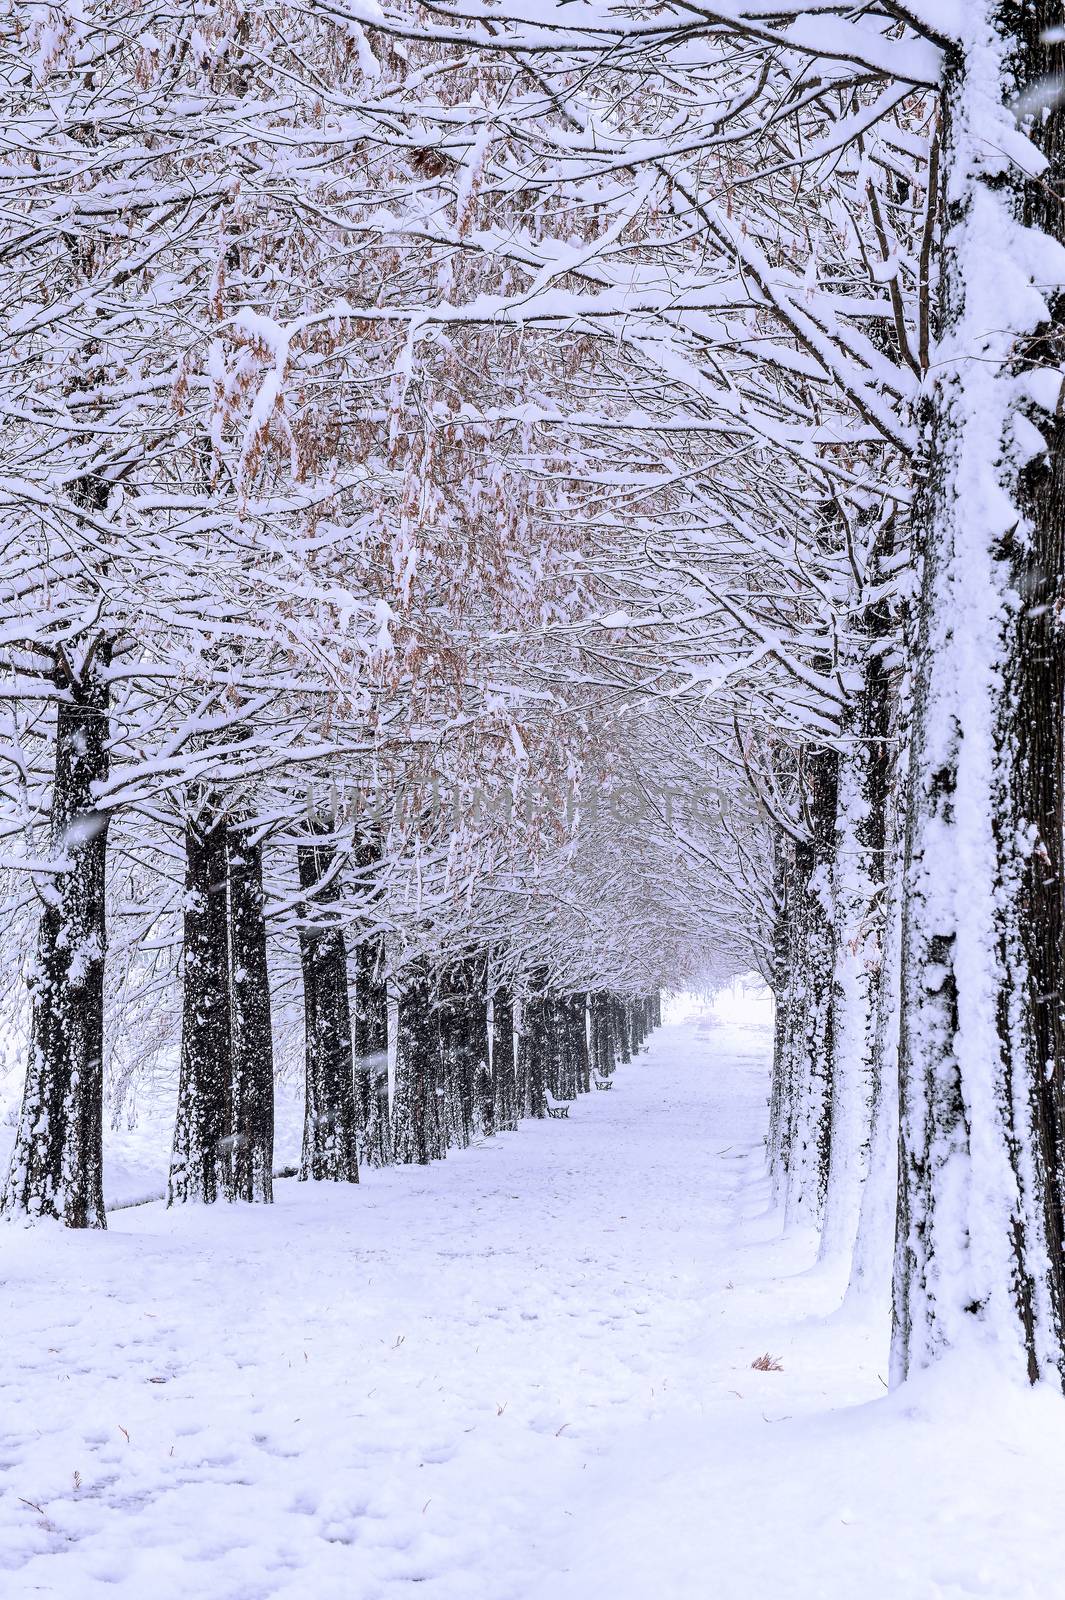 Row of trees in Winter with falling snow. by gutarphotoghaphy